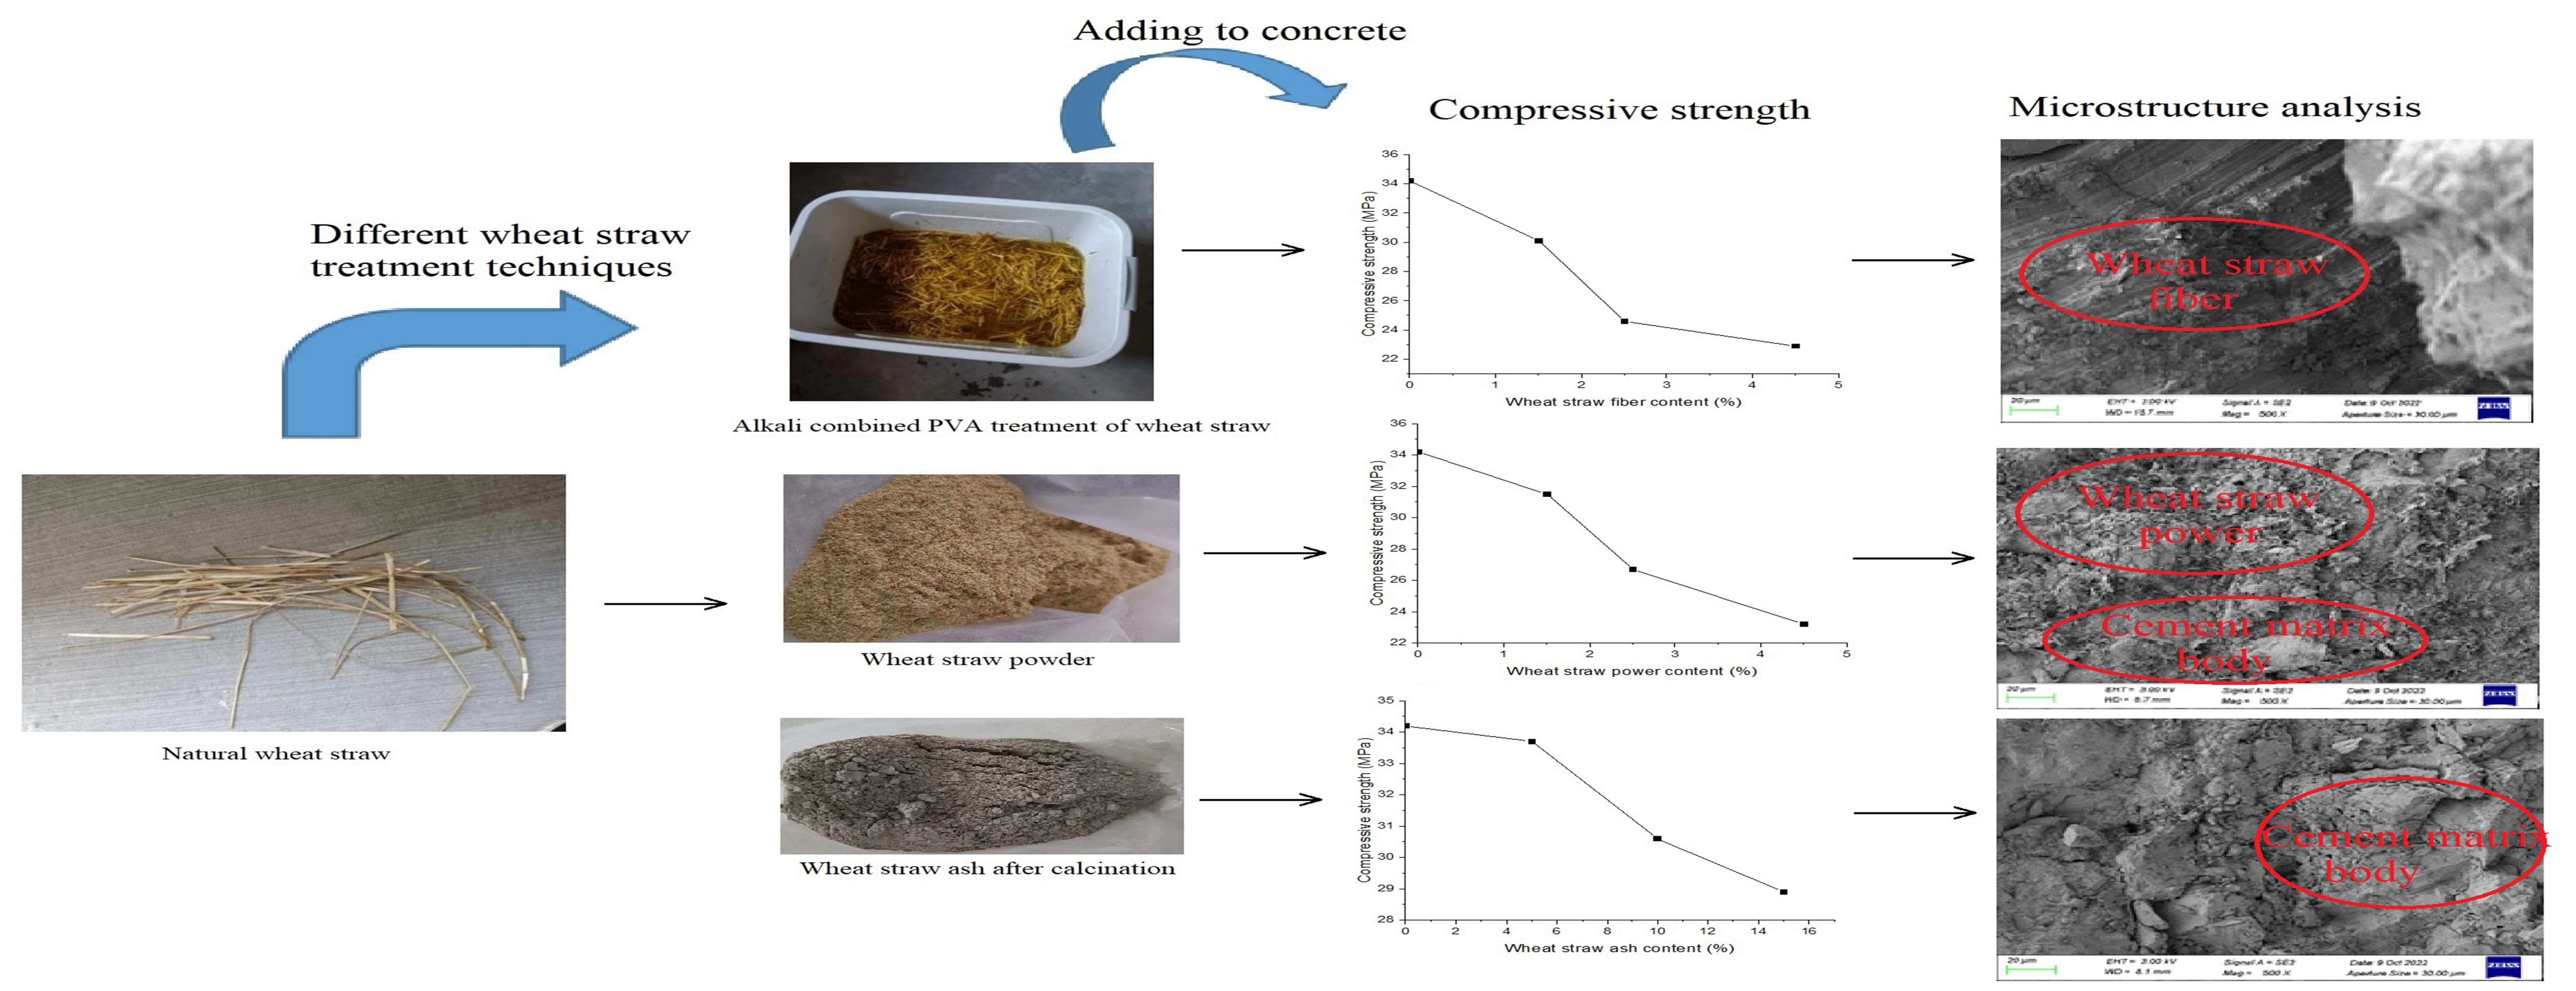 Experimental Study on the Compressive Strength of Concrete with Different Wheat Straw Treatment Techniques